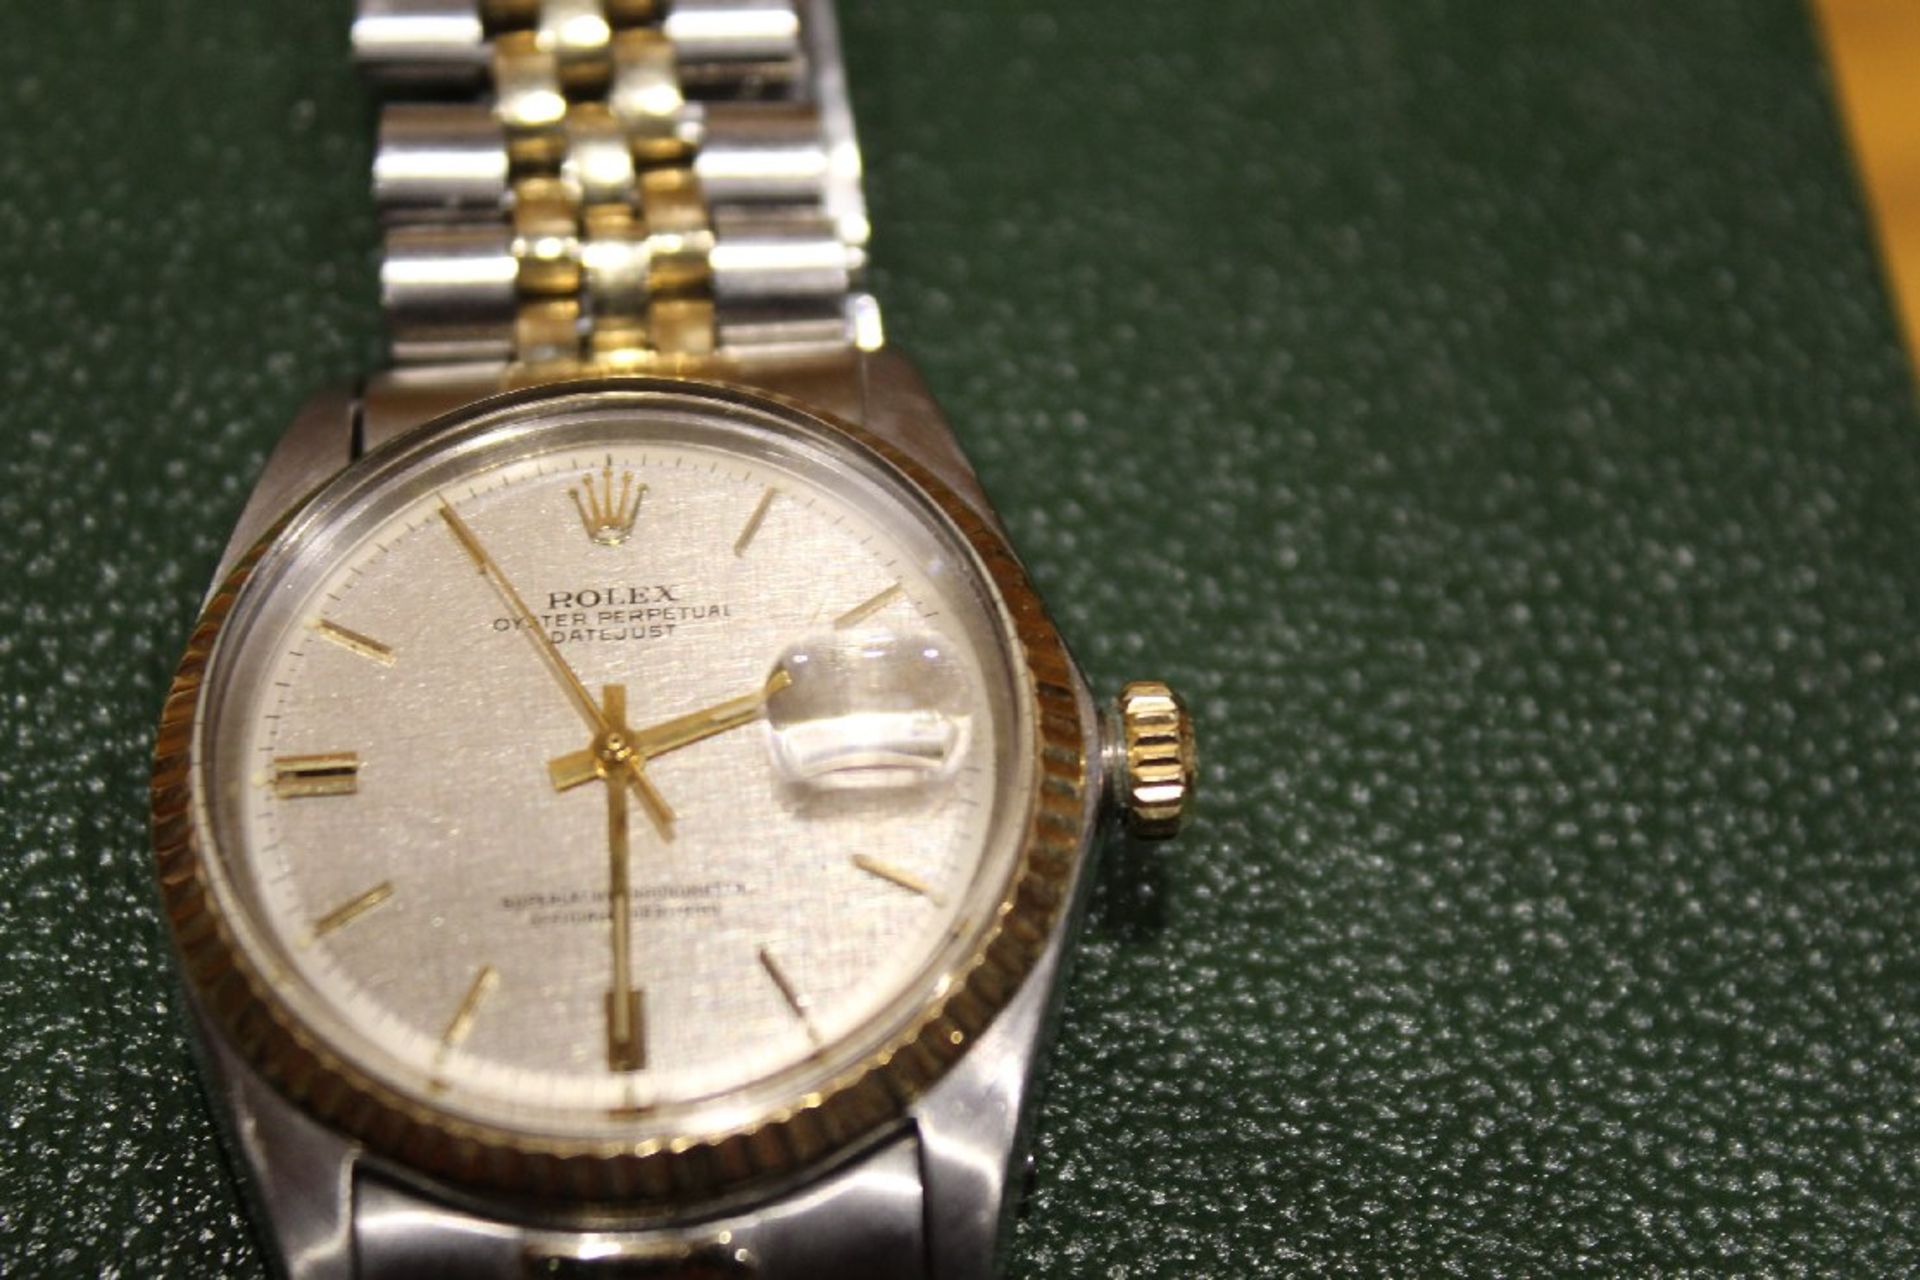 Rolex Oyster Watch. Sterling Silver & 14kt Yellow Gold. SN 2221498 - Purchased in 1971 - Image 5 of 7